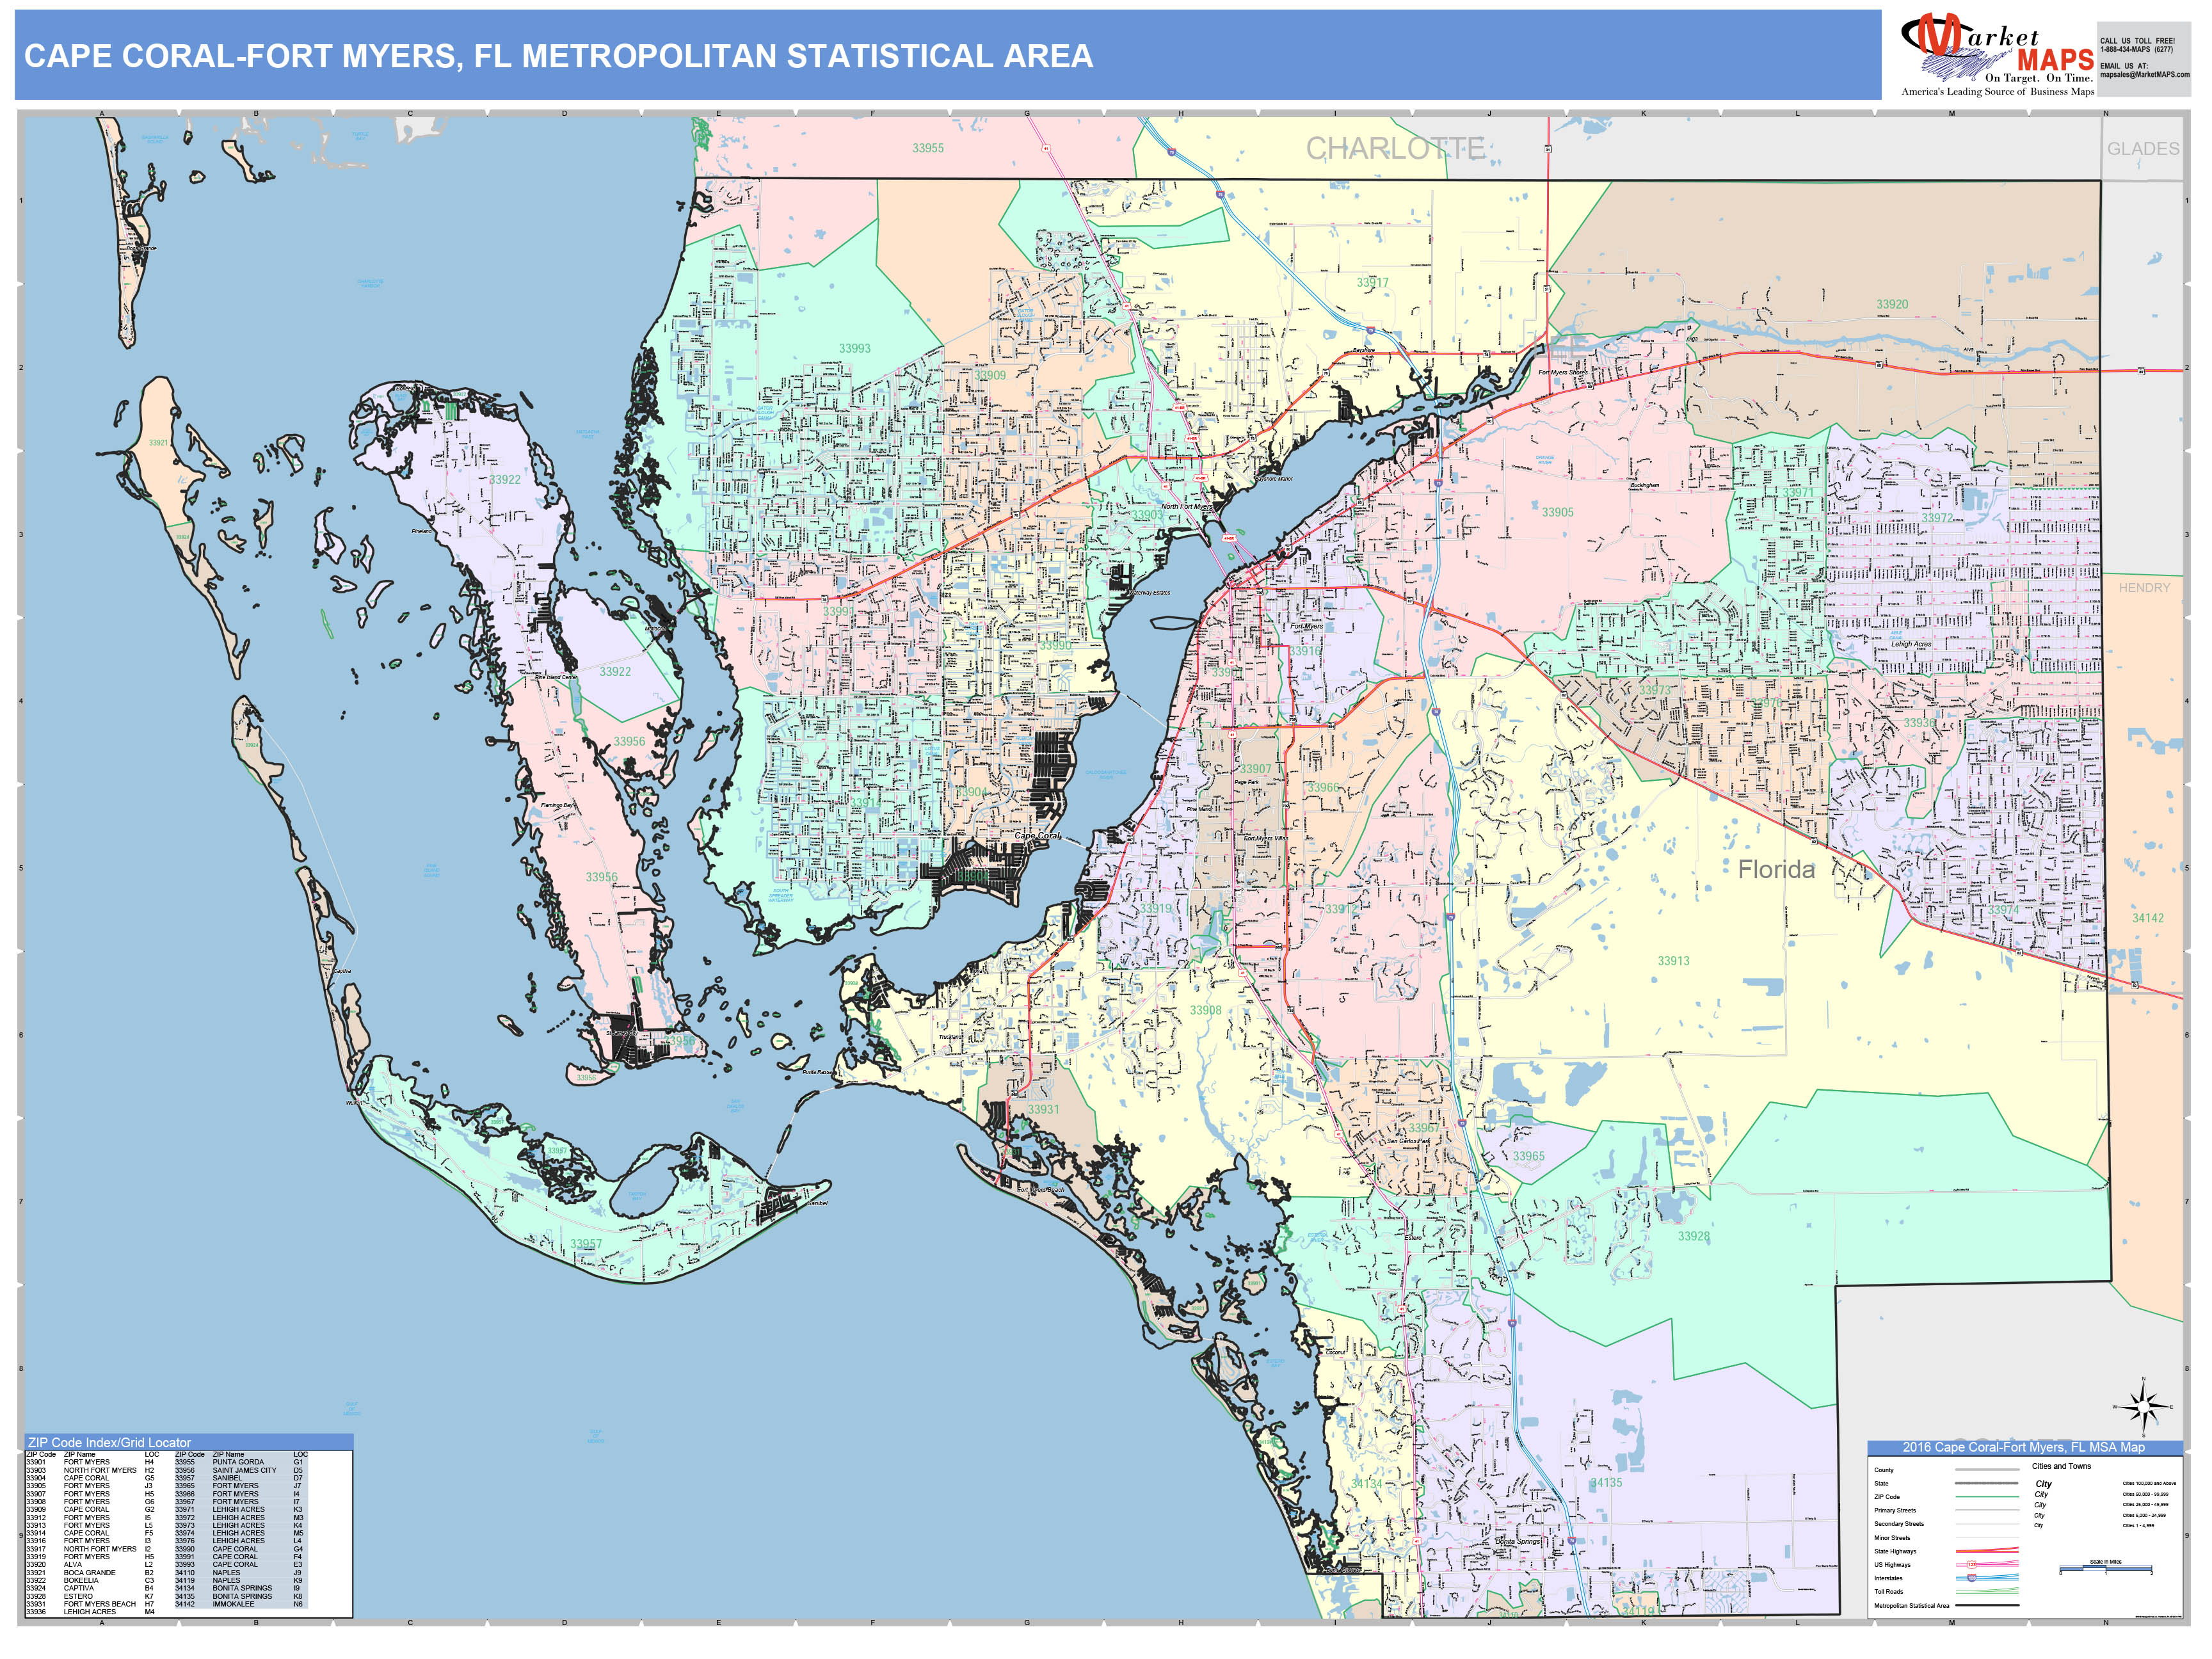 Cape Coral Fort Myers Fl Metro Area Wall Map Color Cast Style By Marketmaps 8126